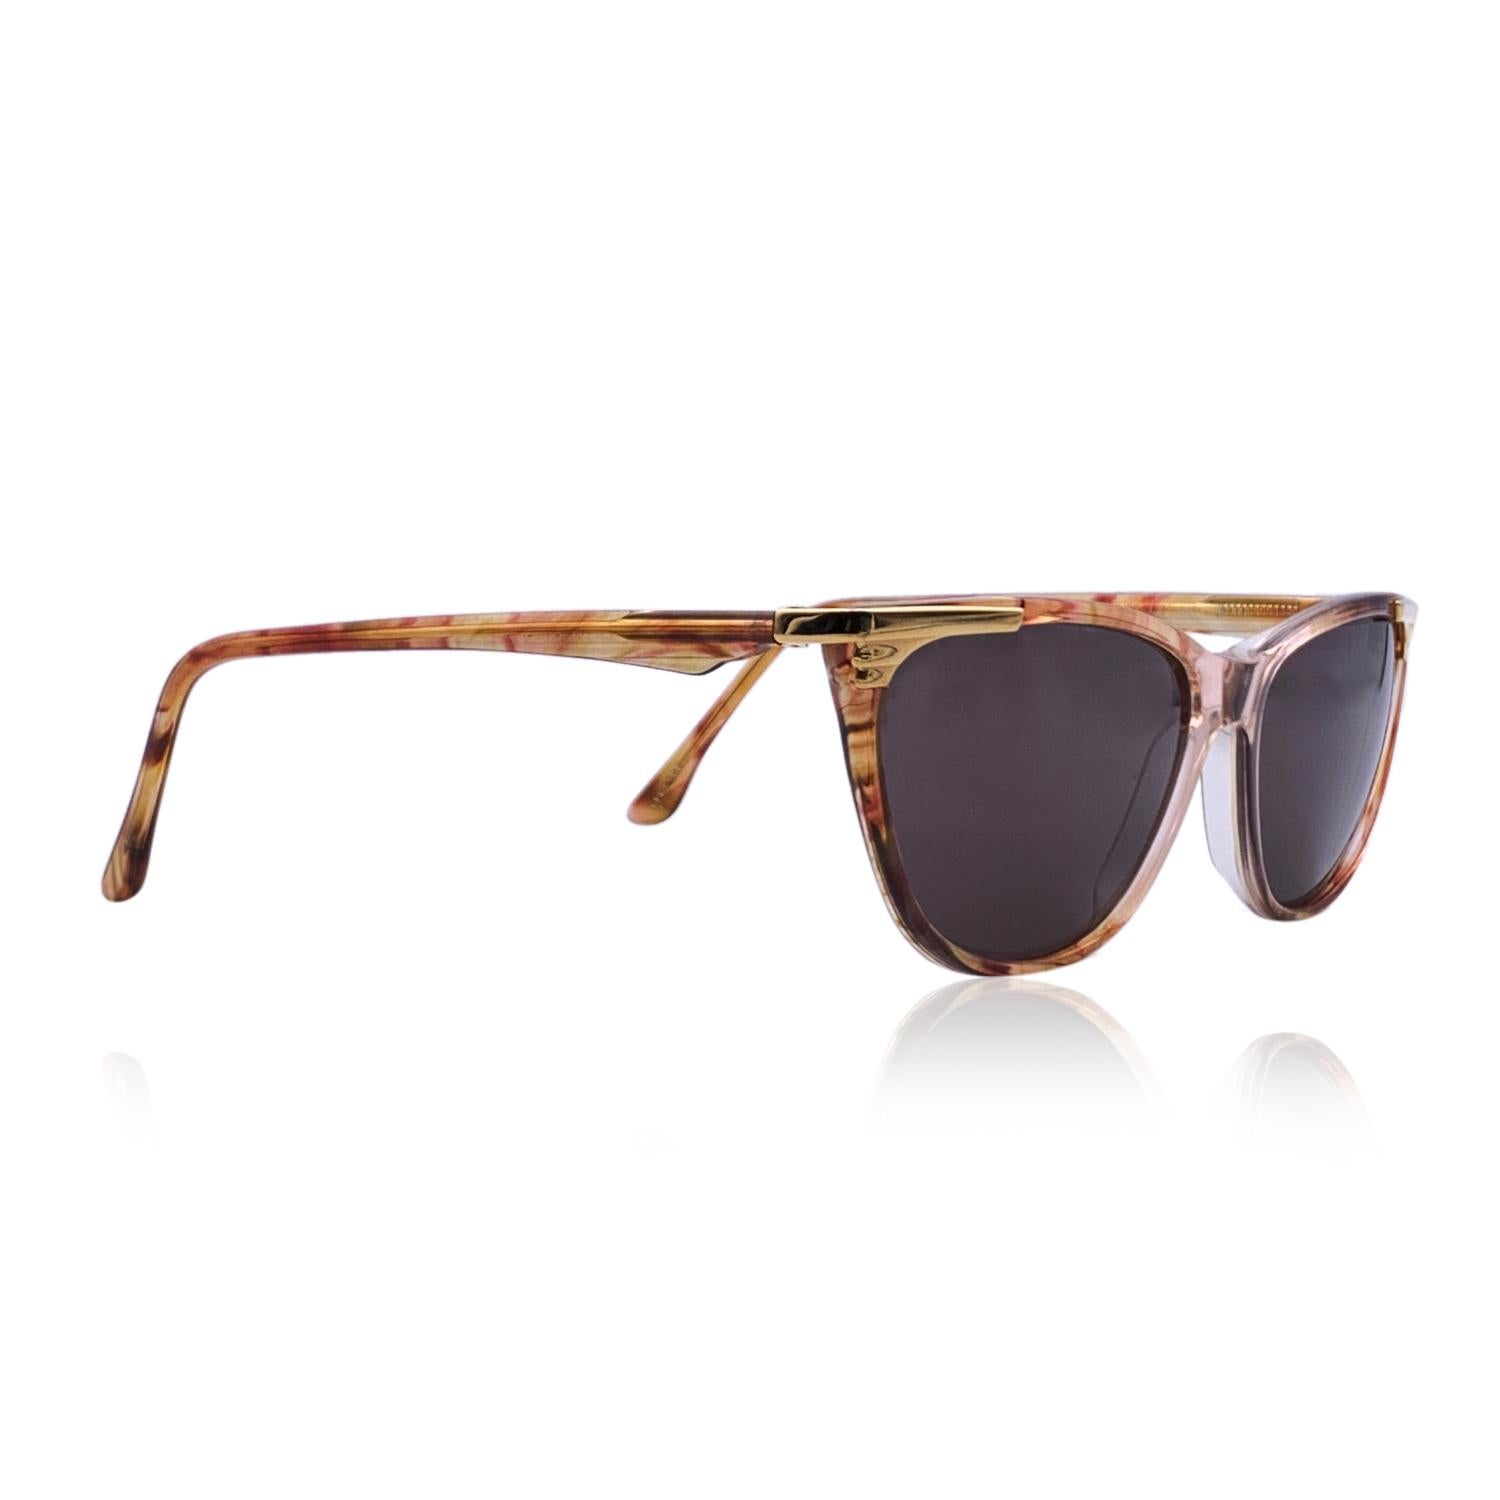 Vintage sunglasses Mod. V 72 - Col 987 by Gianni Versace. Iconic 90s sunglasses . Clear and brown acetate frame with gold metal details. Original lenses in grey color. 100% Total UVA/UVB protection. Made in Italy

Details

MATERIAL: Acetate

COLOR: